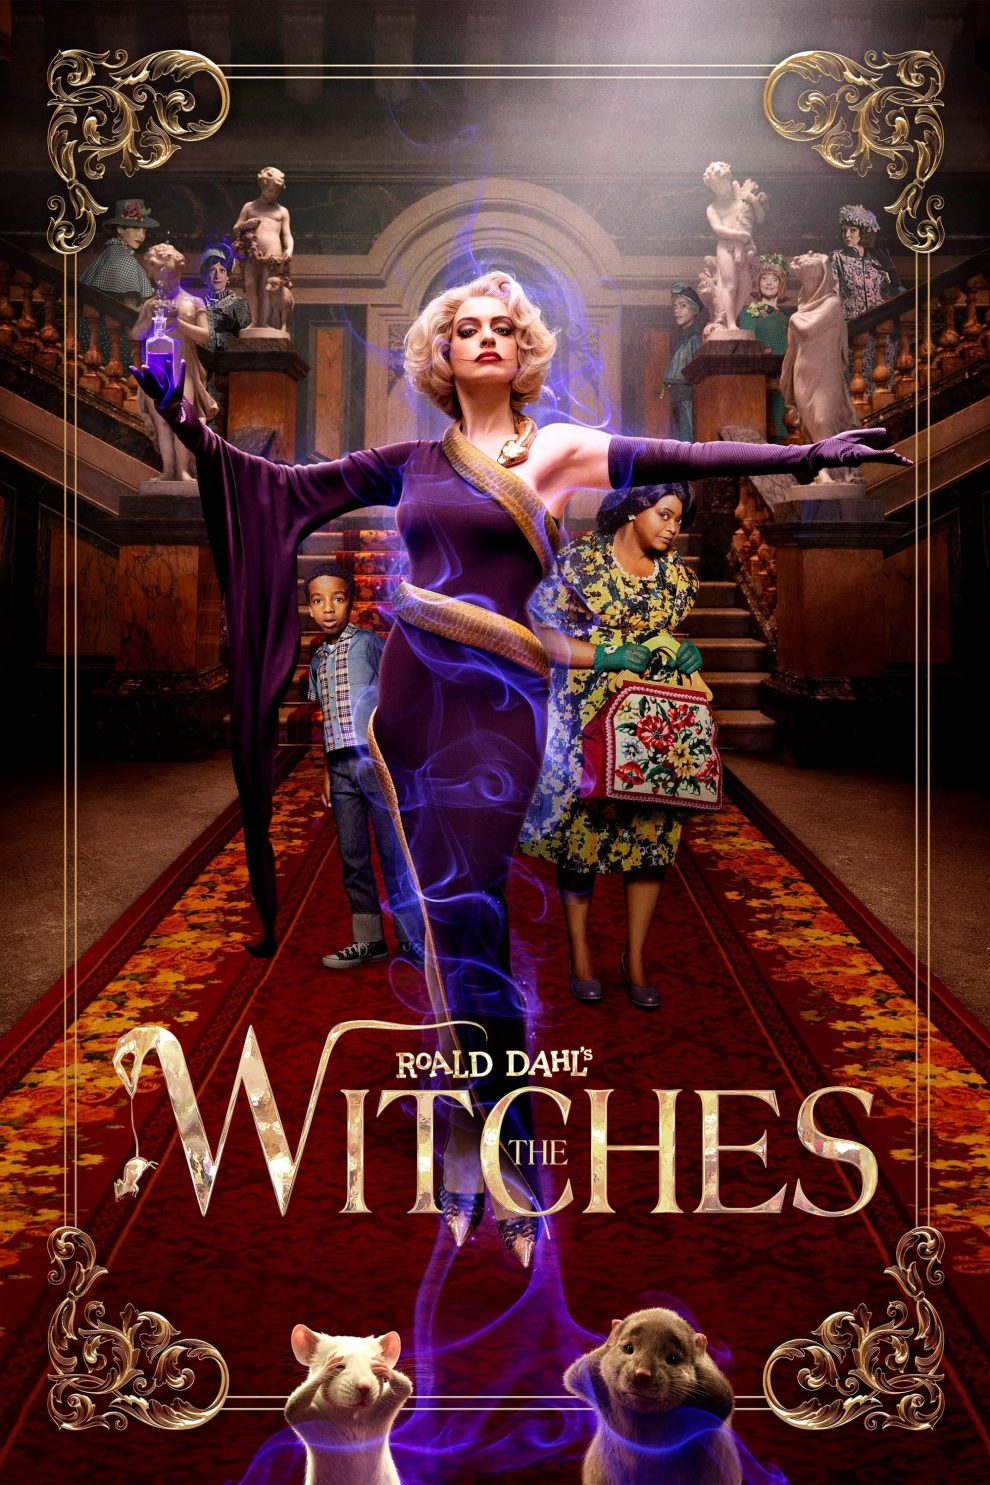 Poster for the movie "Roald Dahl's The Witches"